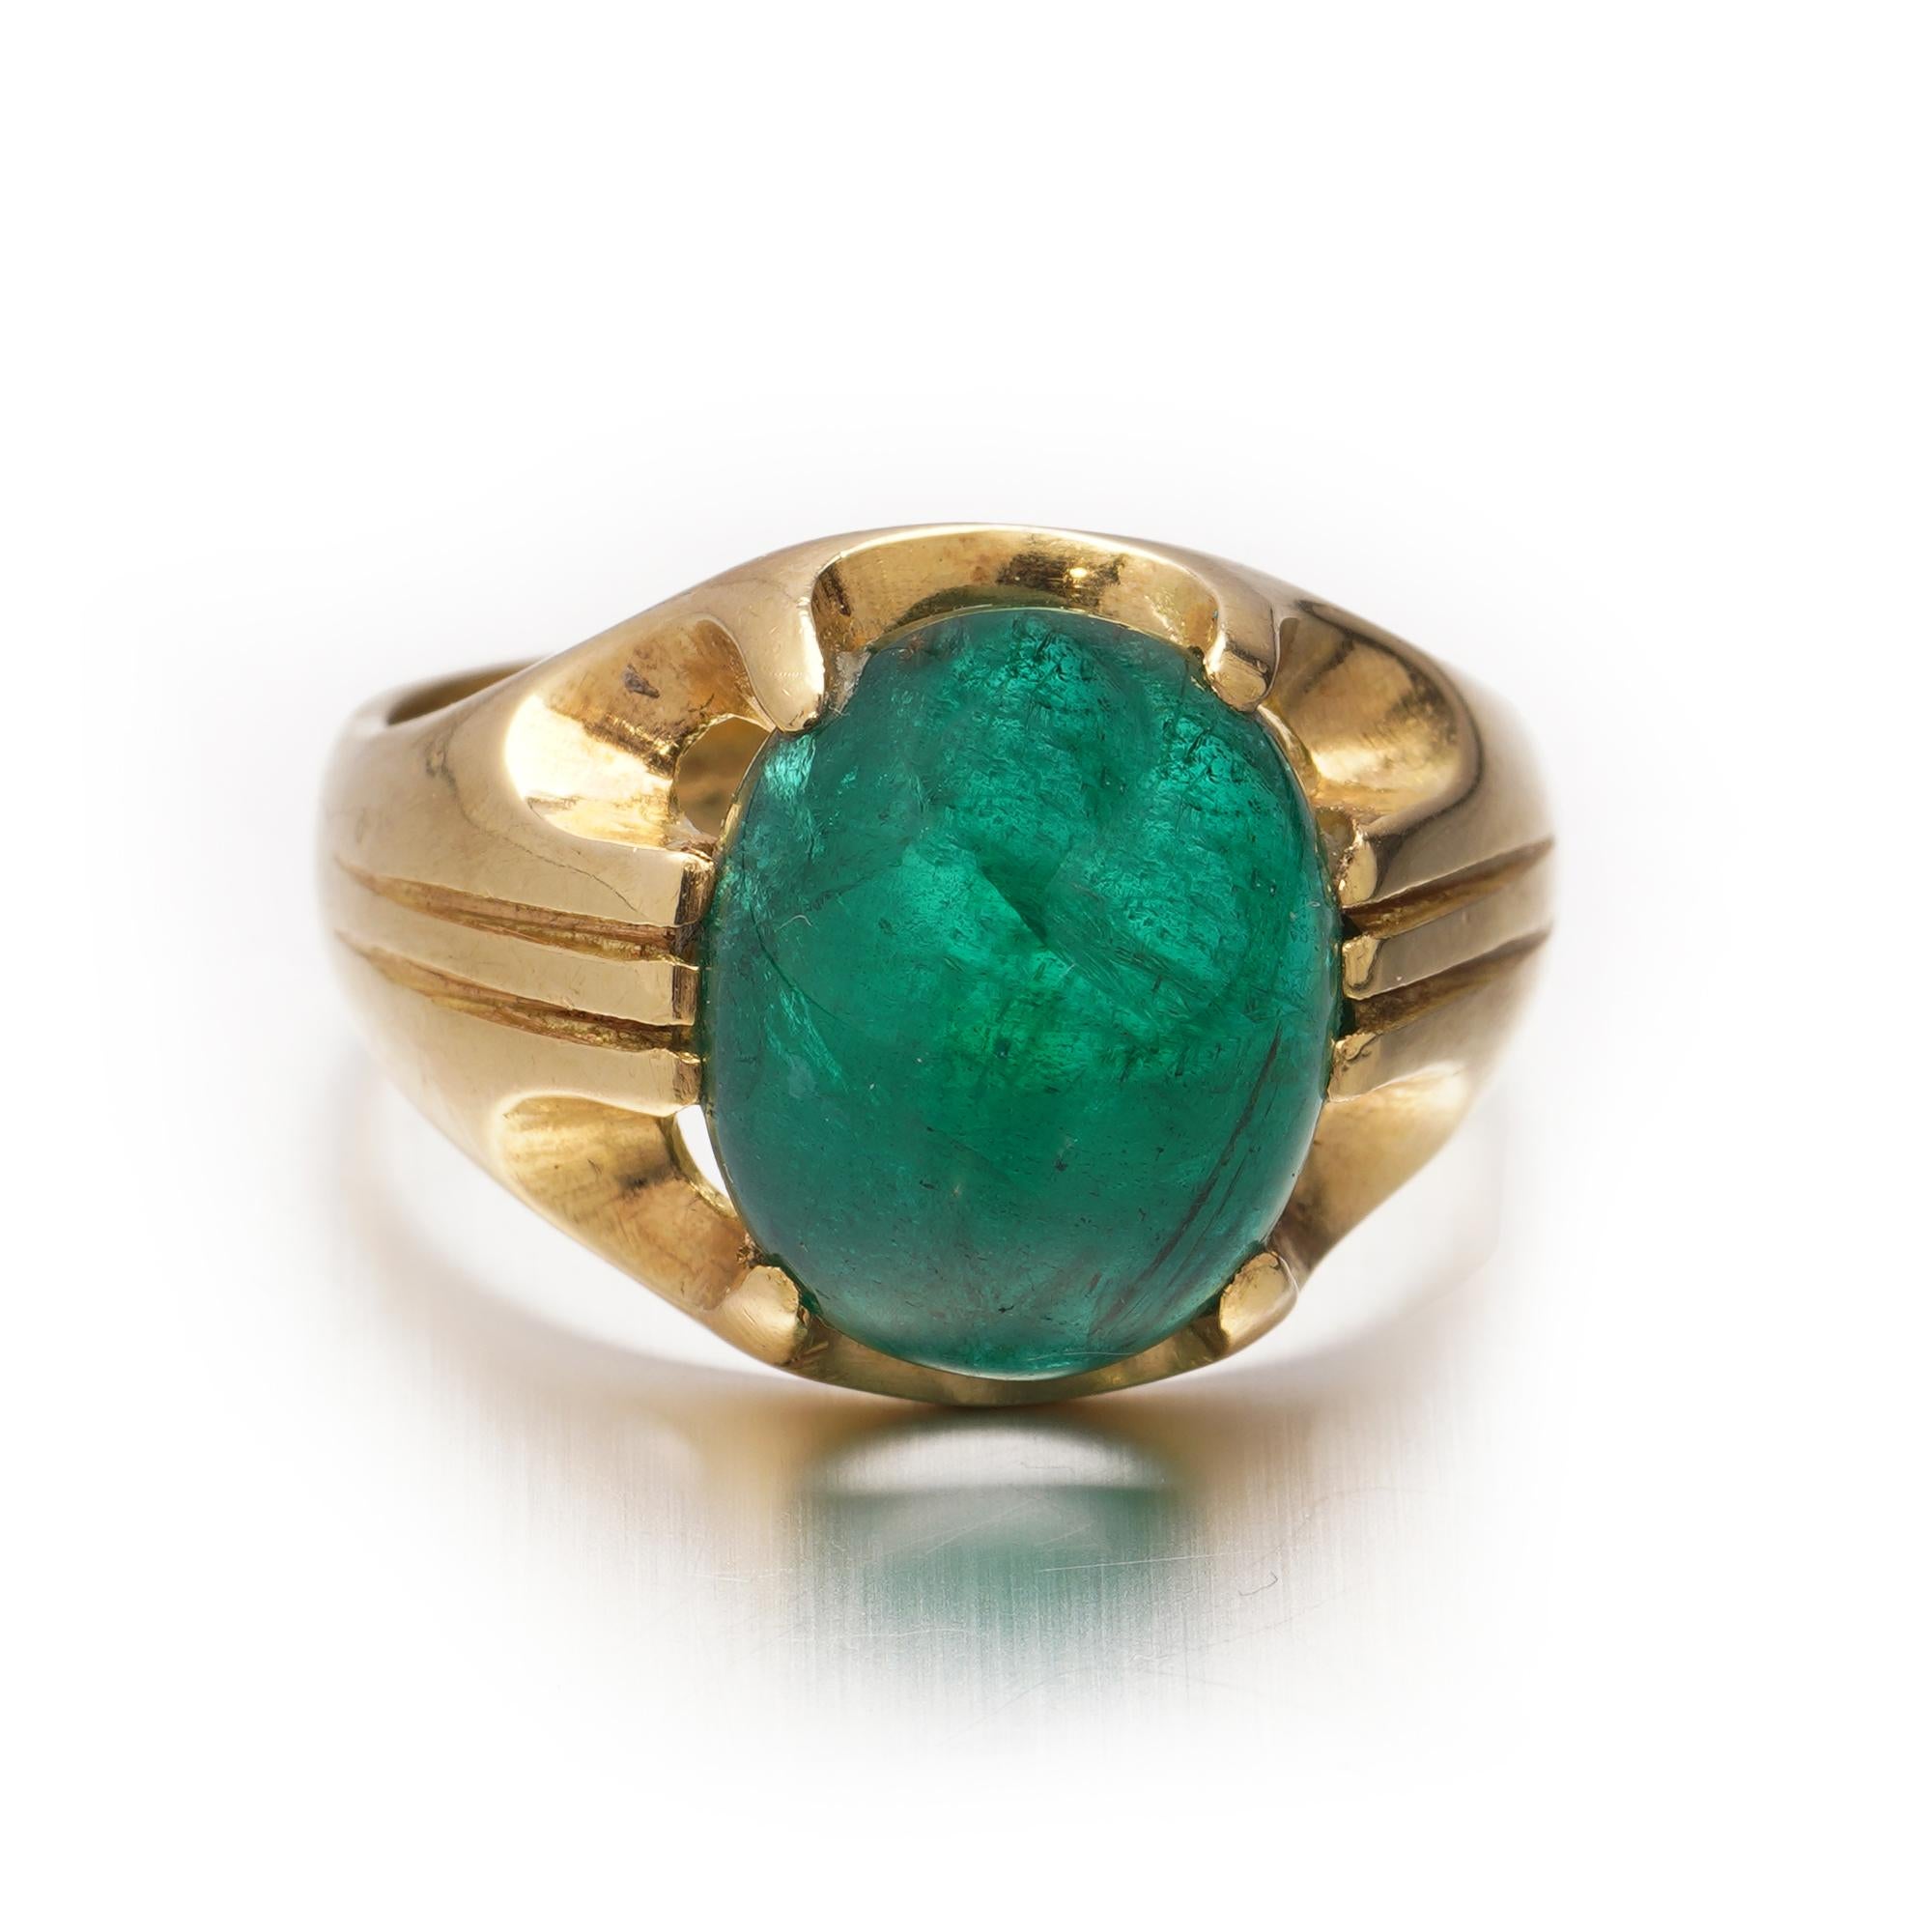 Emerald Cut 18kt. Yellow Gold Dome 7.50 Ct. Cabochon Emerald Ring For Sale